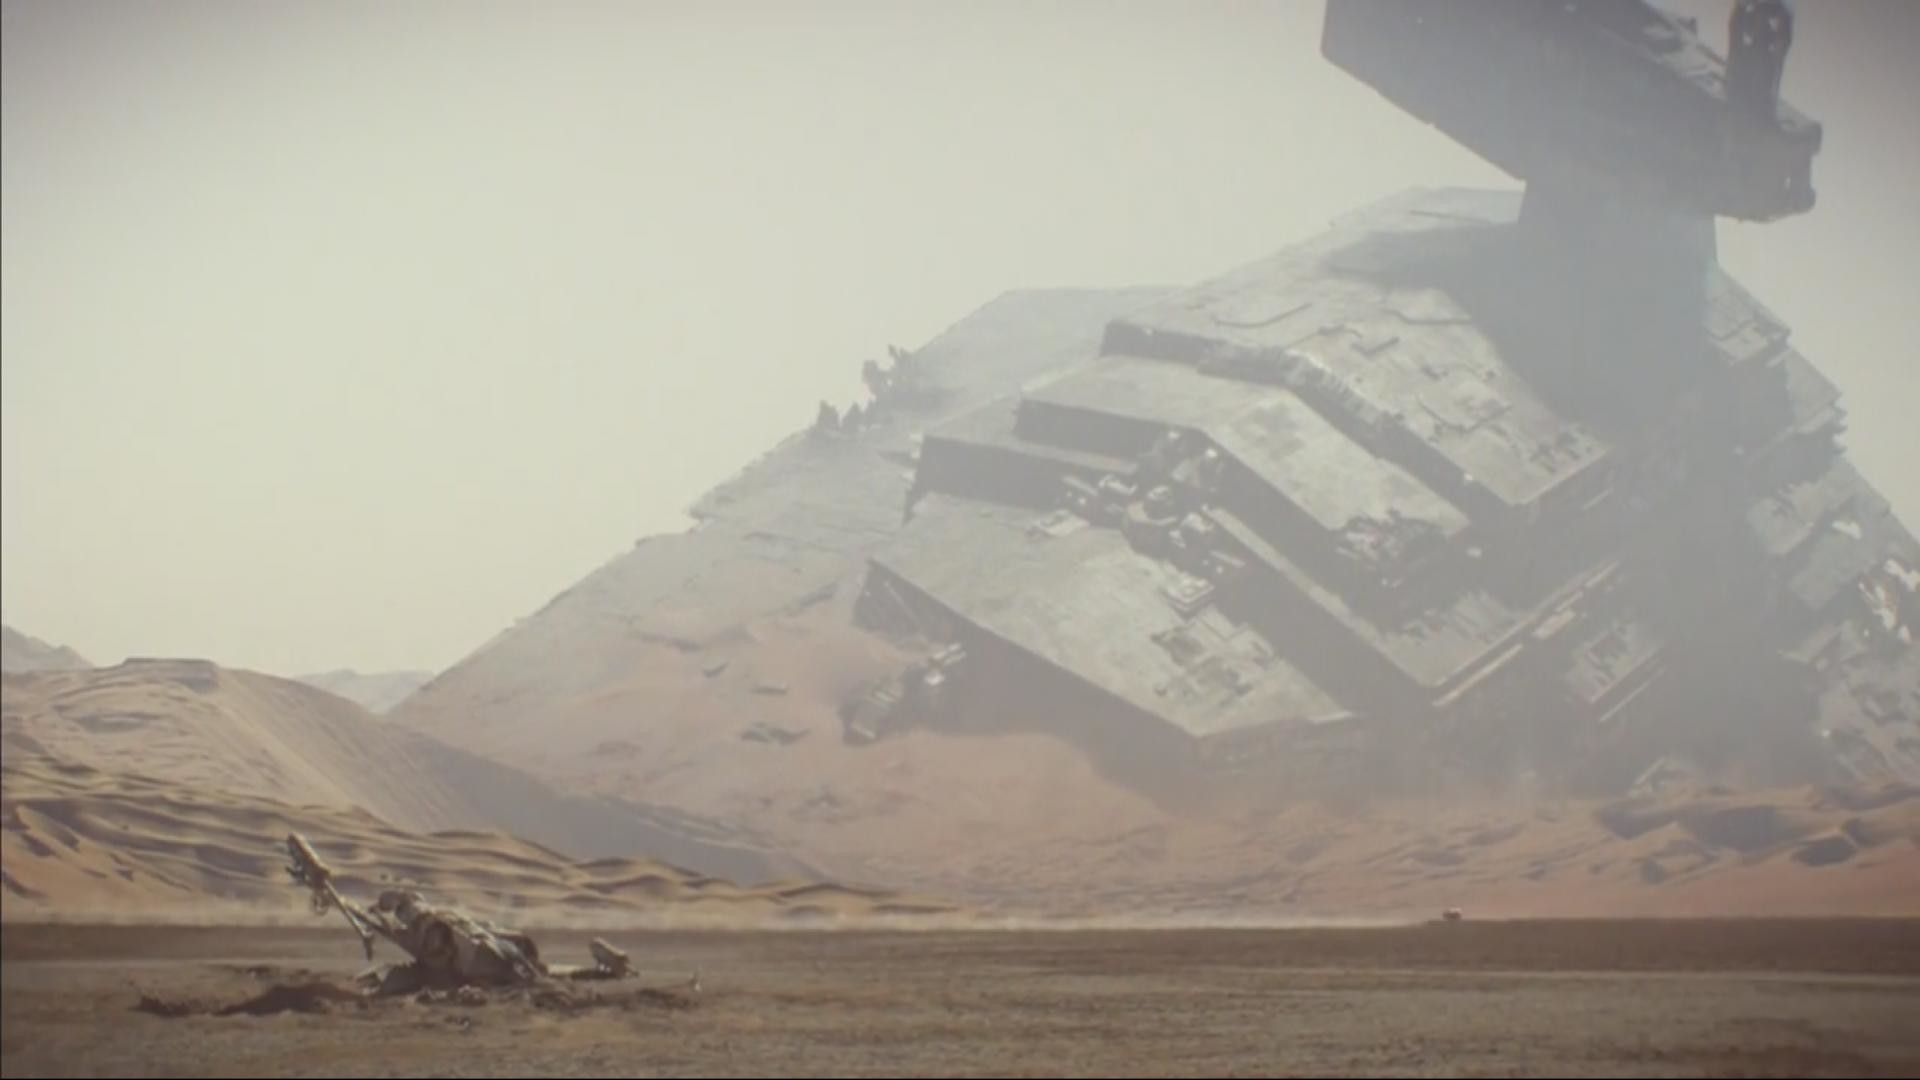 1920x1080  Crashed Star Destroyer wallpaper if anyone wants it